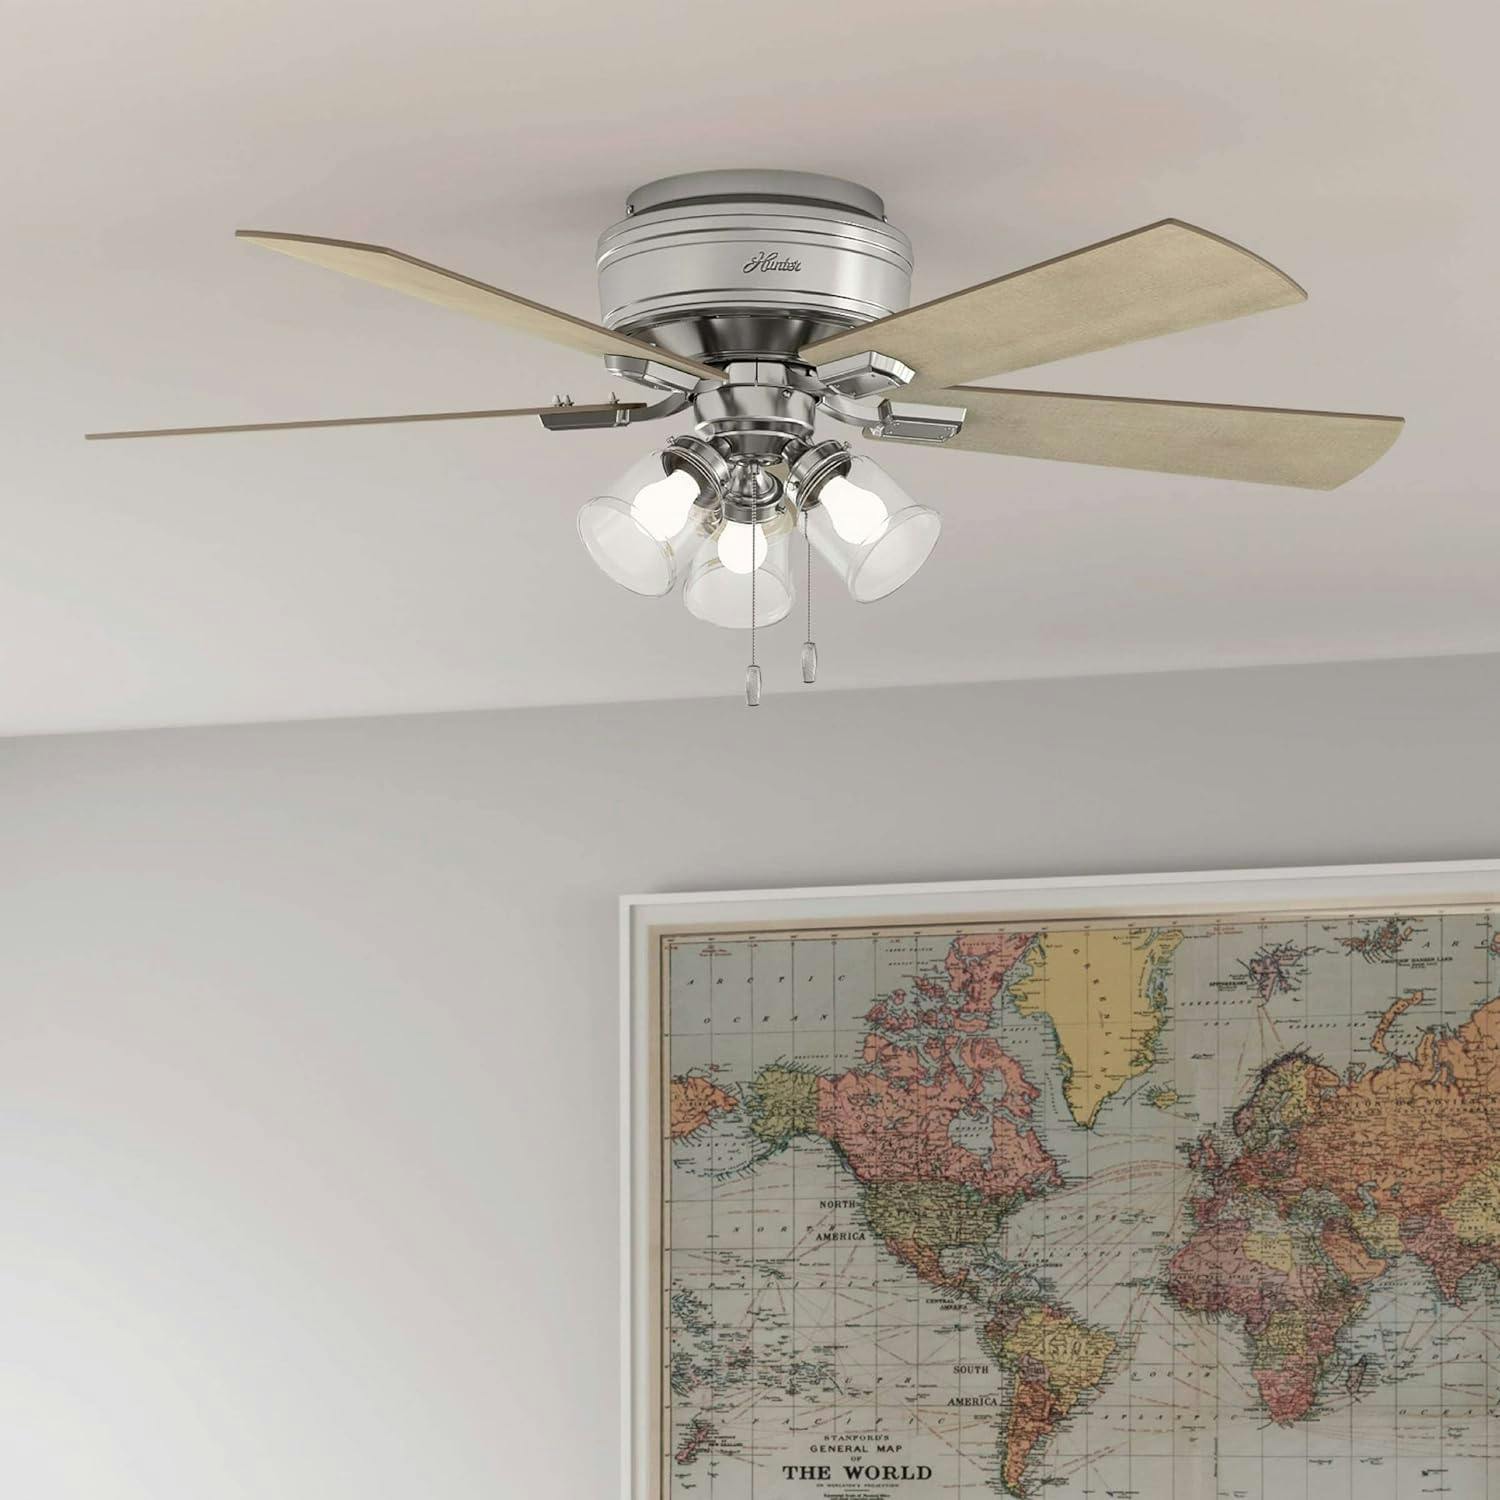 Brushed Nickel 52" Crestfield Ceiling Fan with LED Light and Reversible Blades